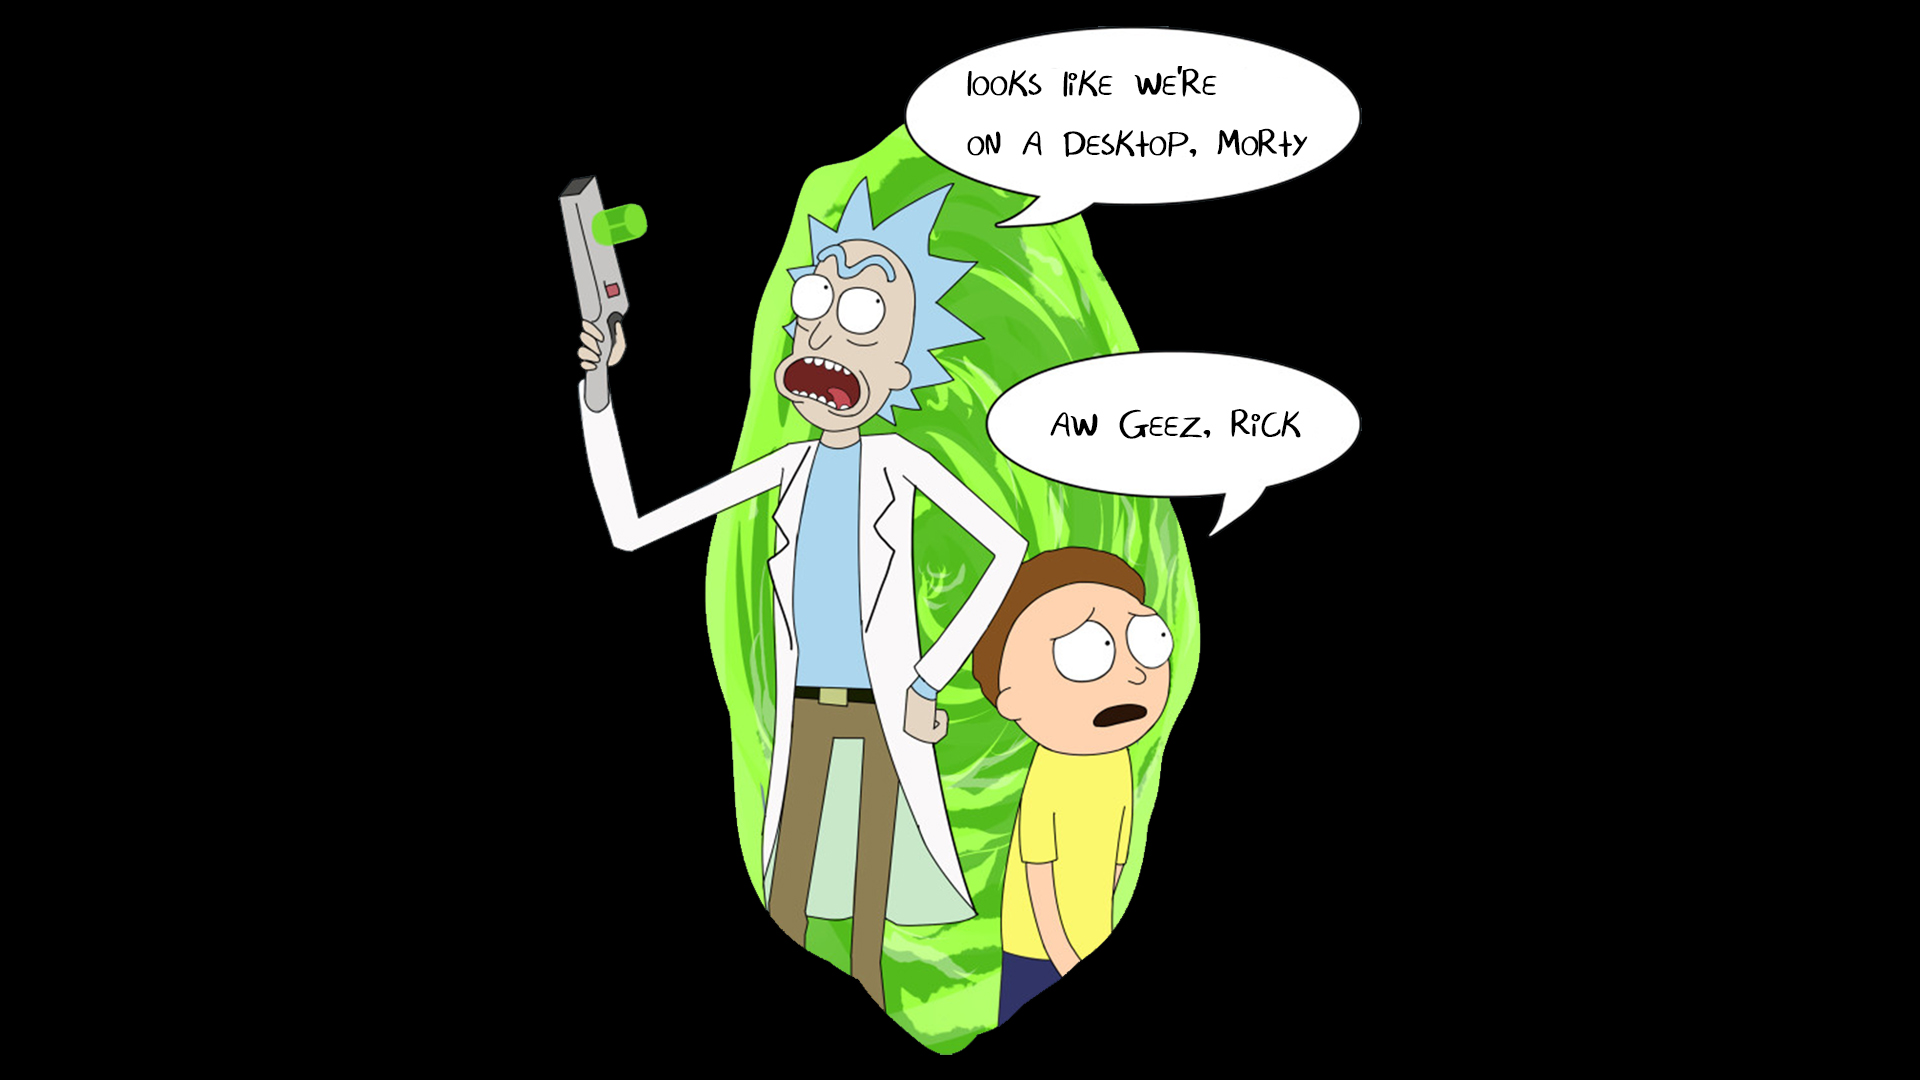 Rick and Morty HD Wallpapers - Top Best HD Rick and Morty Backgrounds  Download